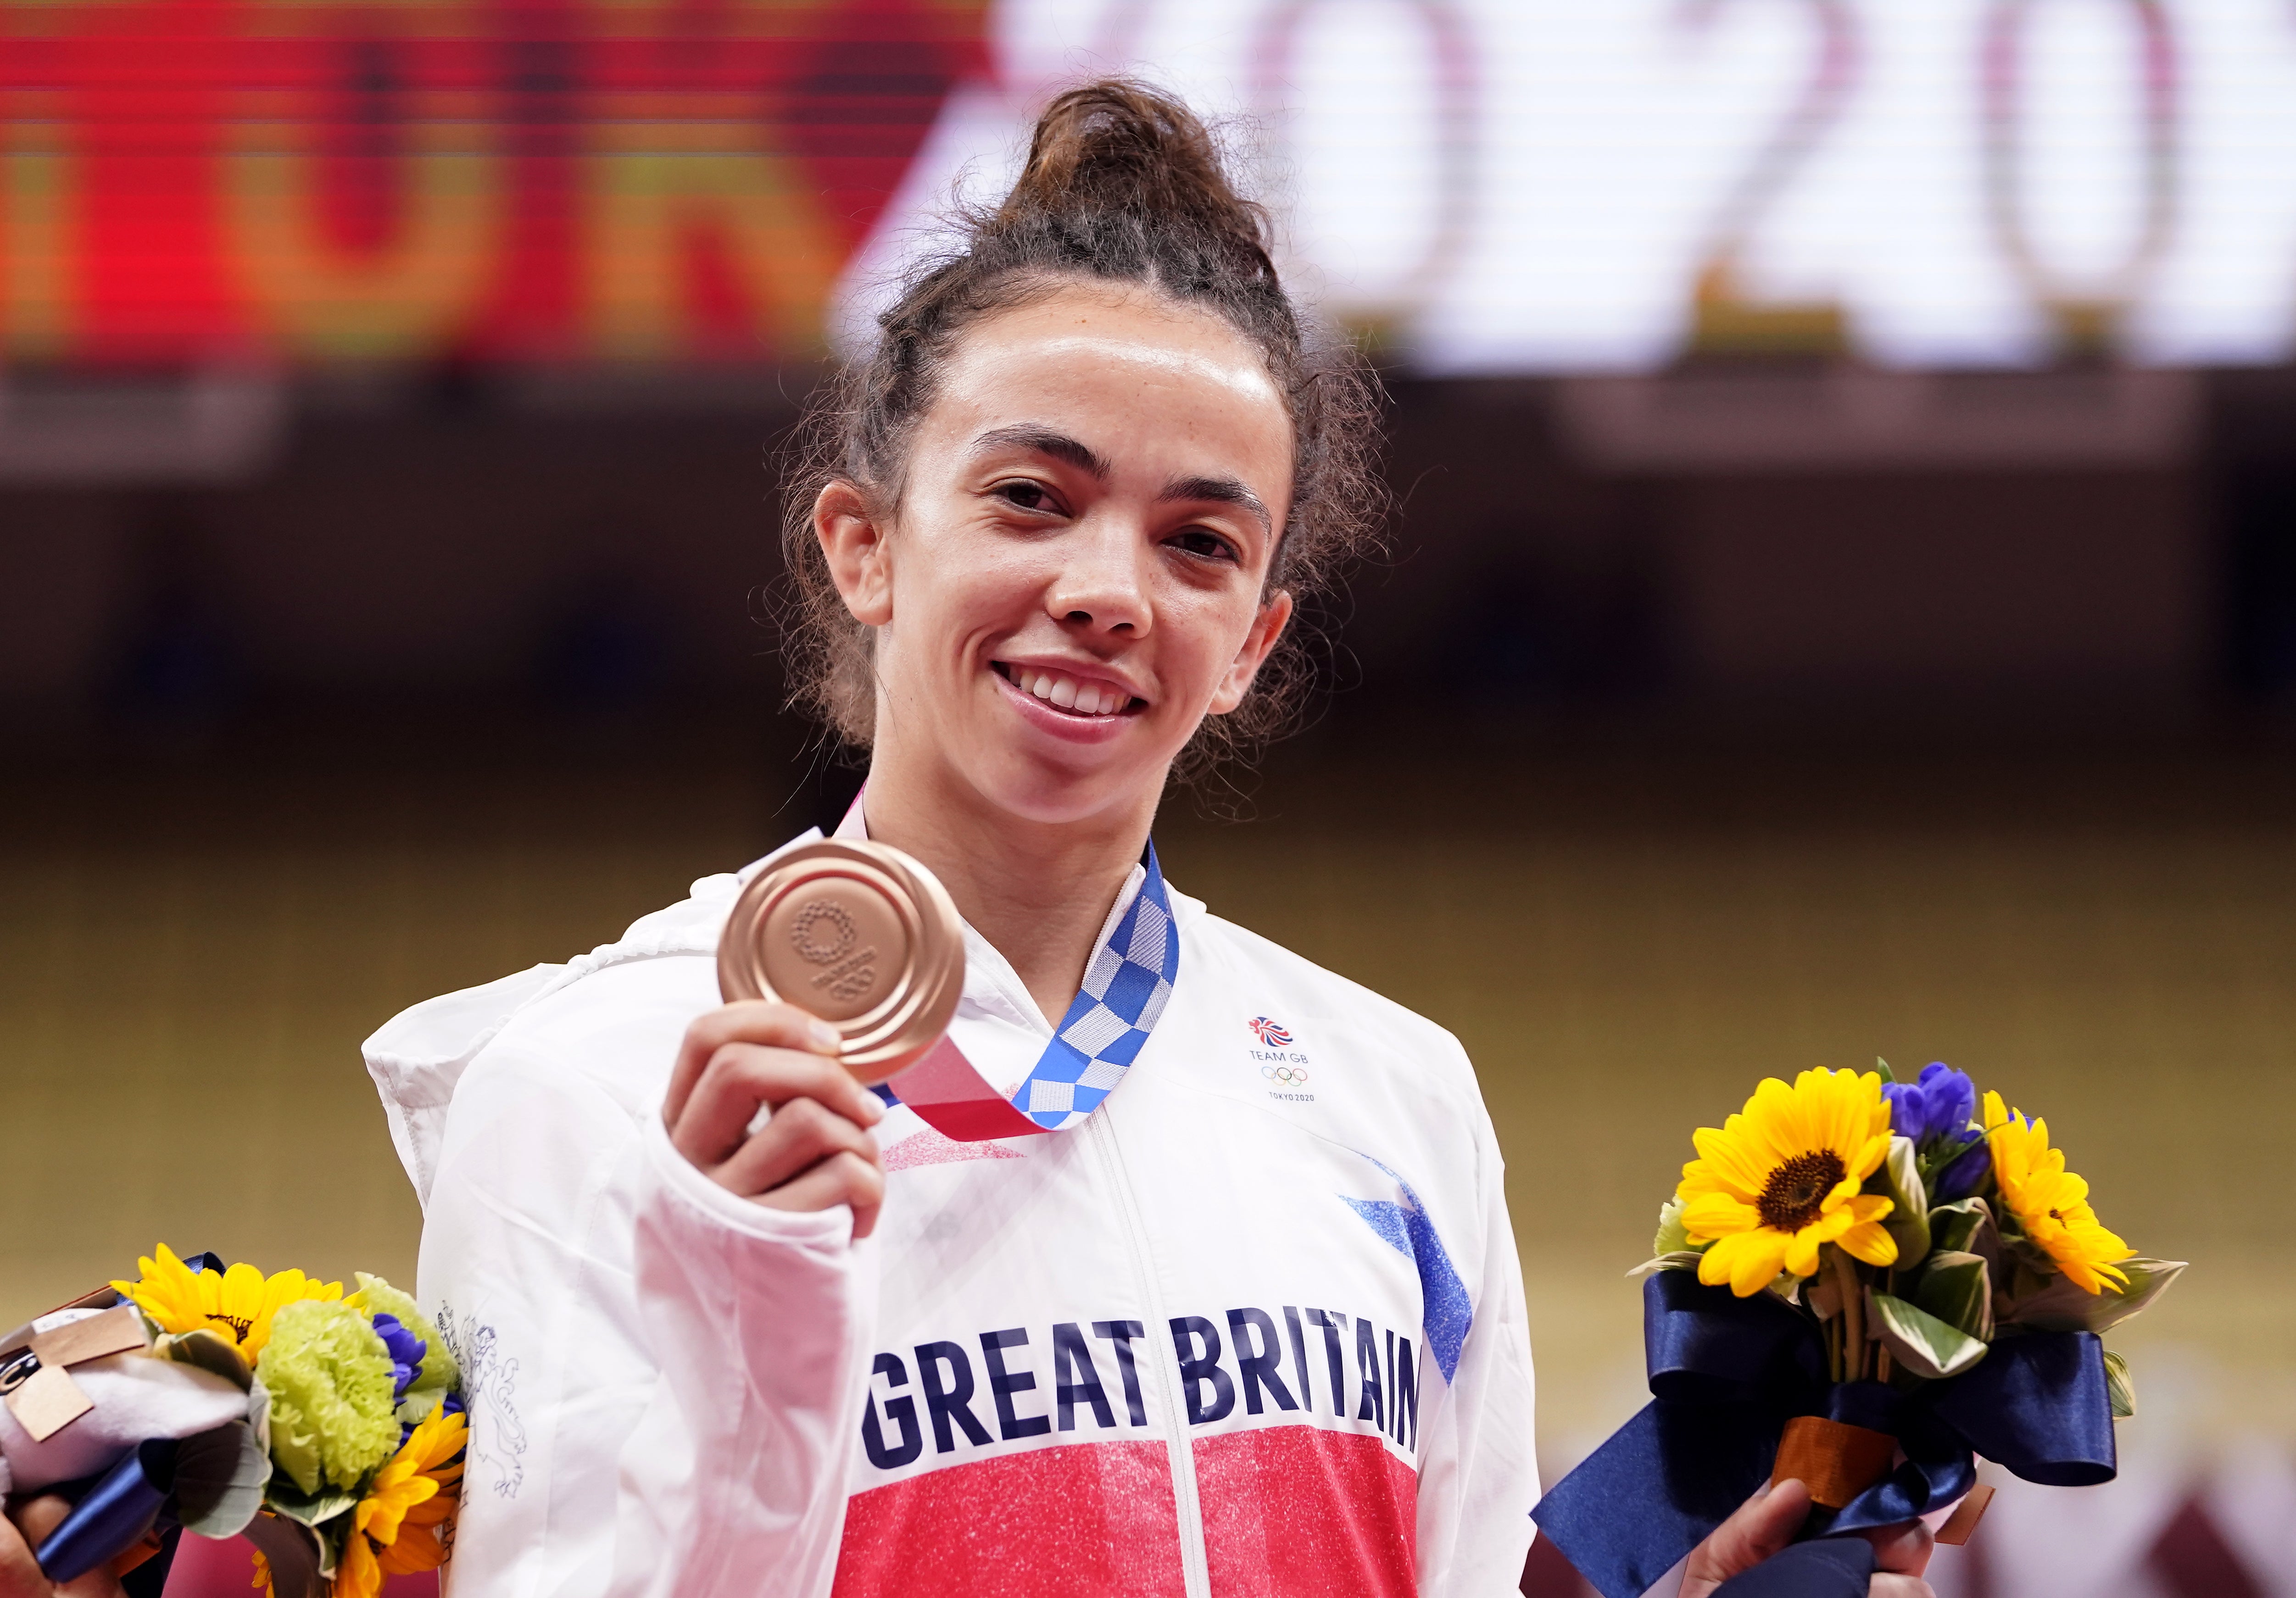 Chelsie Giles shows off her bronze medal, Team GB’s first medal of Tokyo 2020